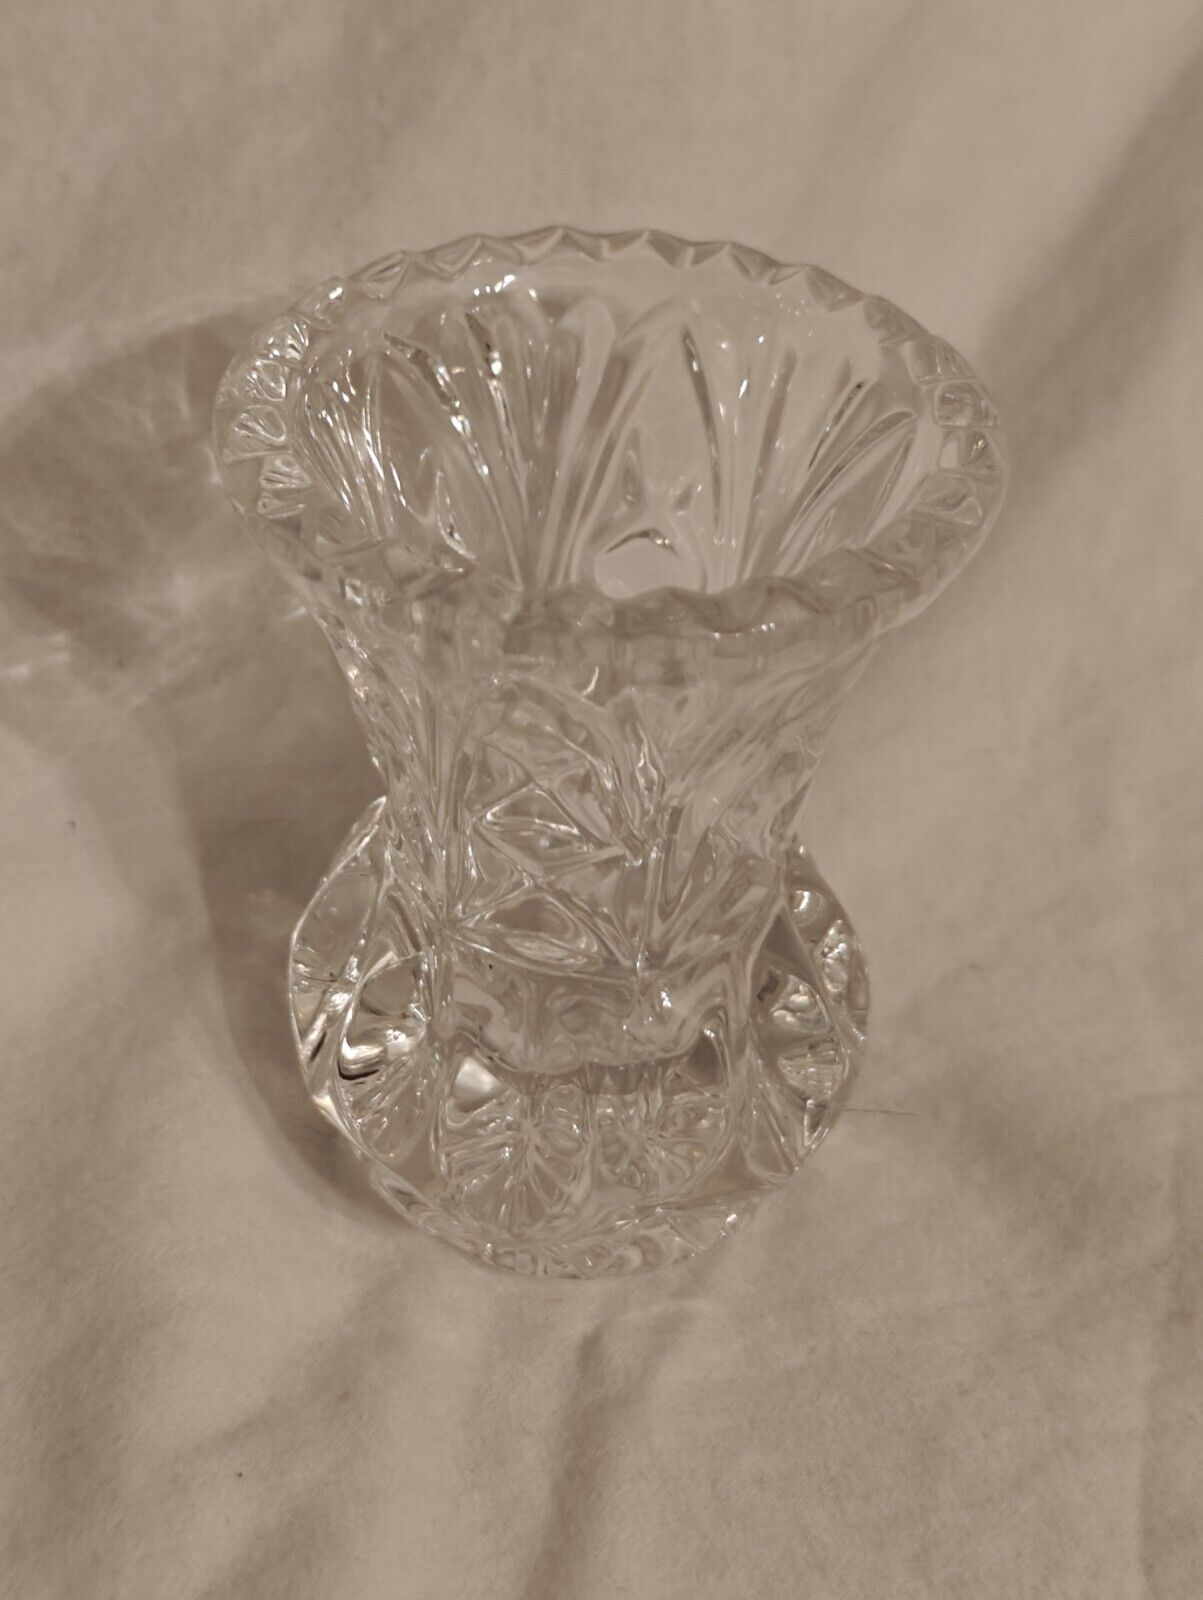 Crystal Glass Tooth Pick Holder or Small Vase, Cut Glass Vase, Etched